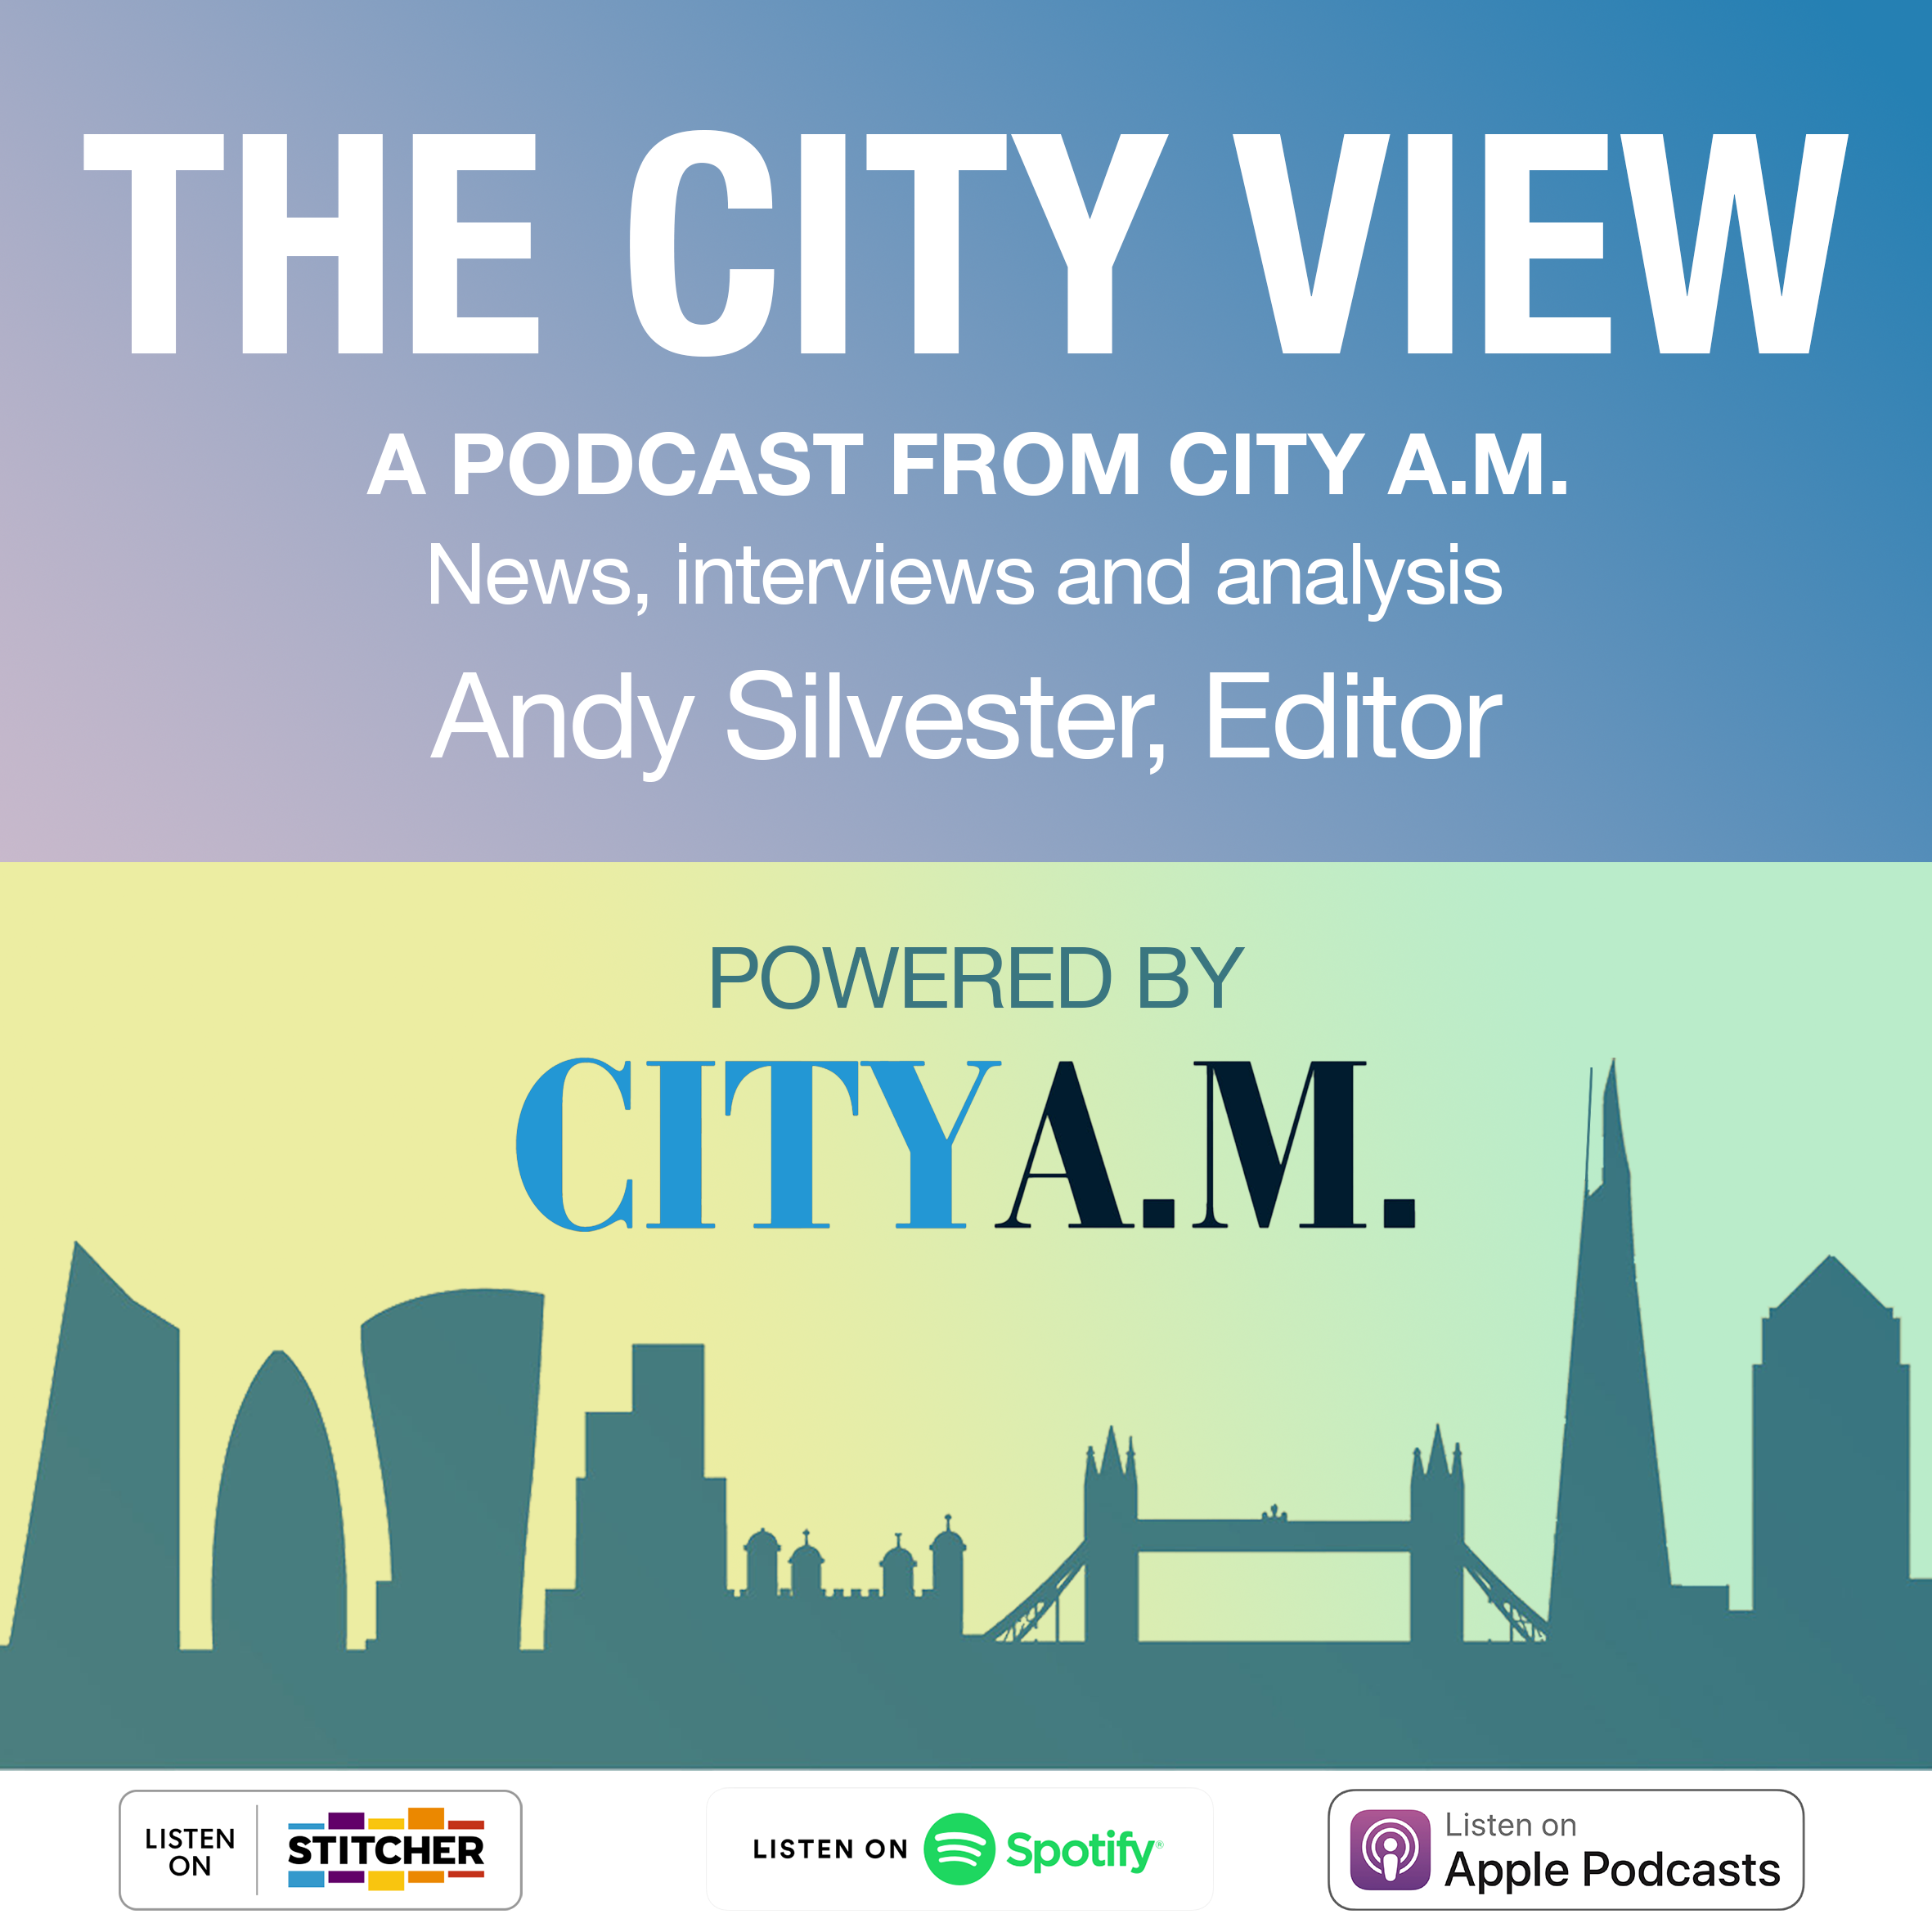 The City View: City A.M. co-founder Lawson Muncaster on returning the newspaper to print